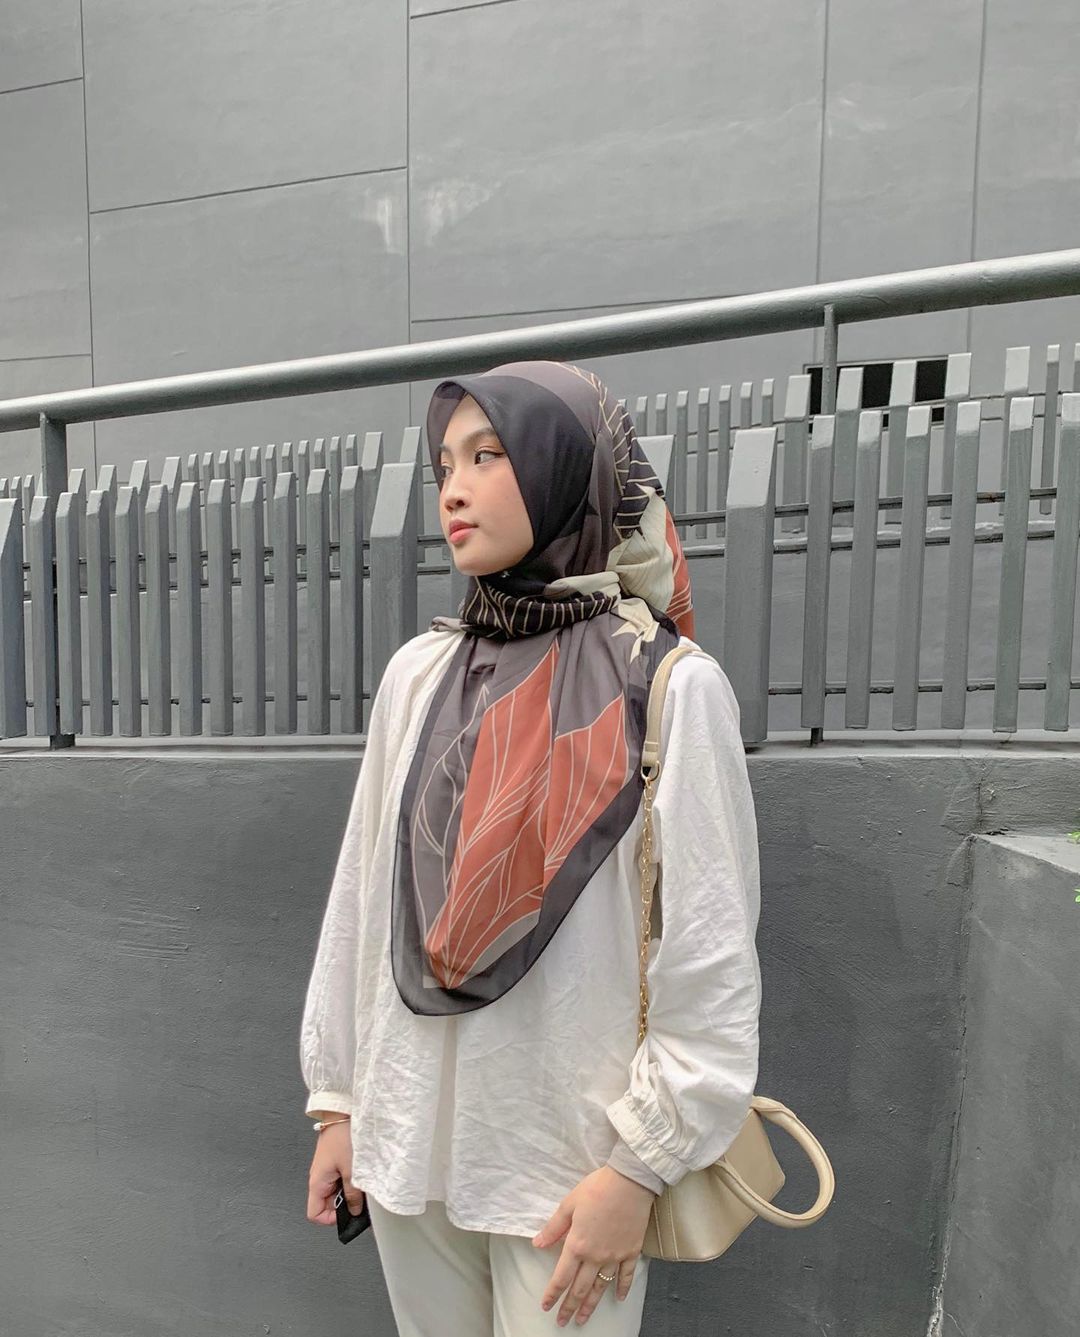 Pattern Scarf For Daily Hijab Looks, Let’s See How Fashion Influencers Style Them